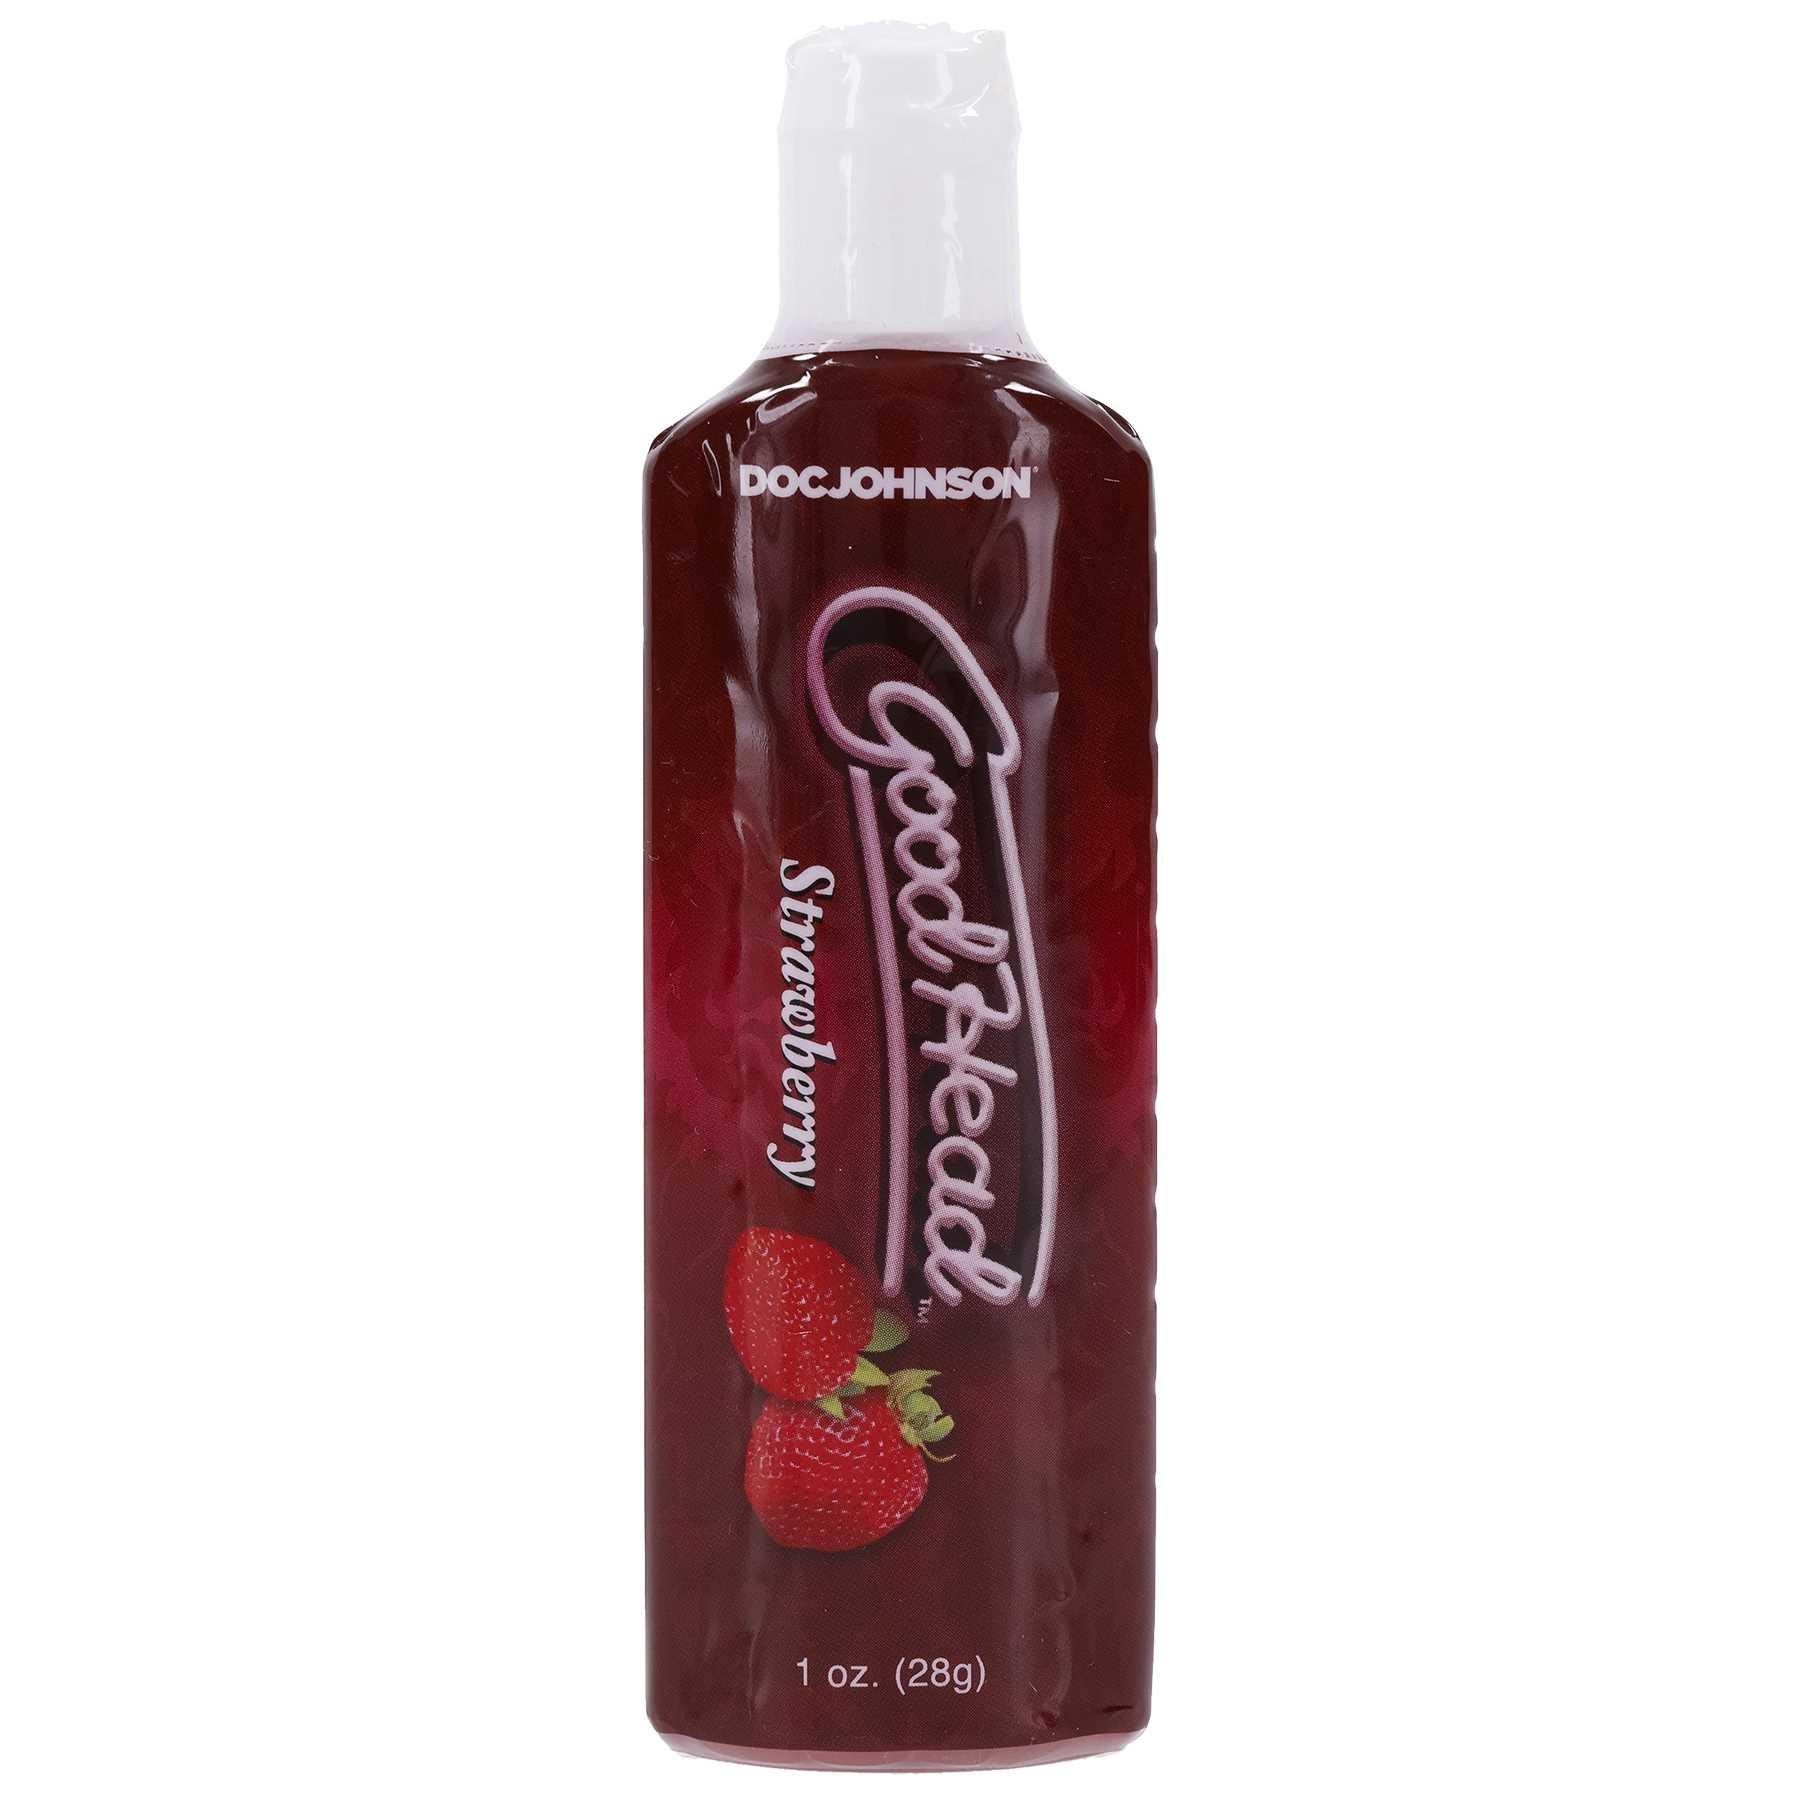 Good Head Kit For her sweet strawberry oral delight gel